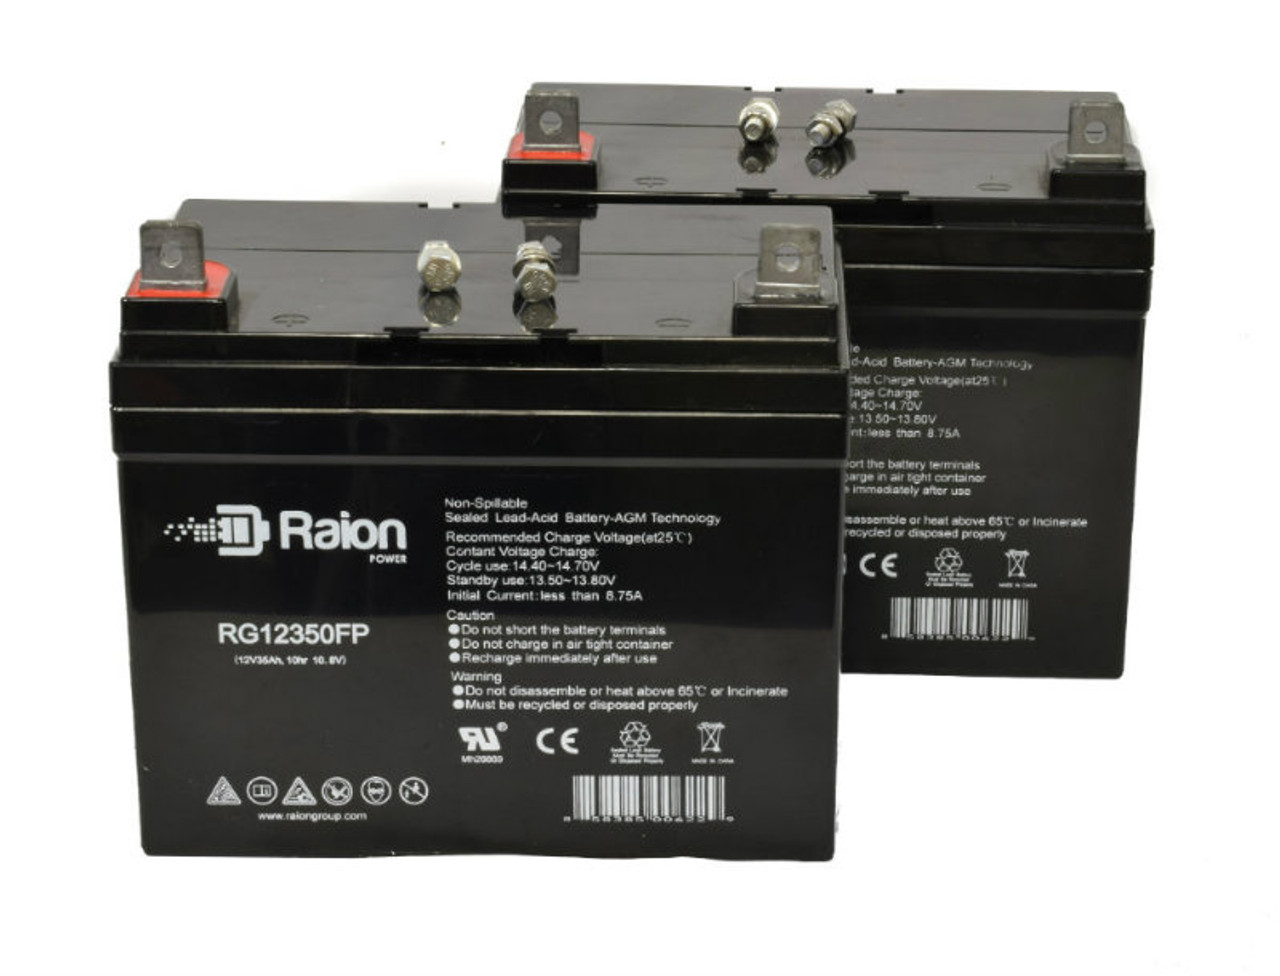 Raion Power Replacement 12V 35Ah Lawn Mower Battery for Ingersol Equipment 5822K - 2 Pack